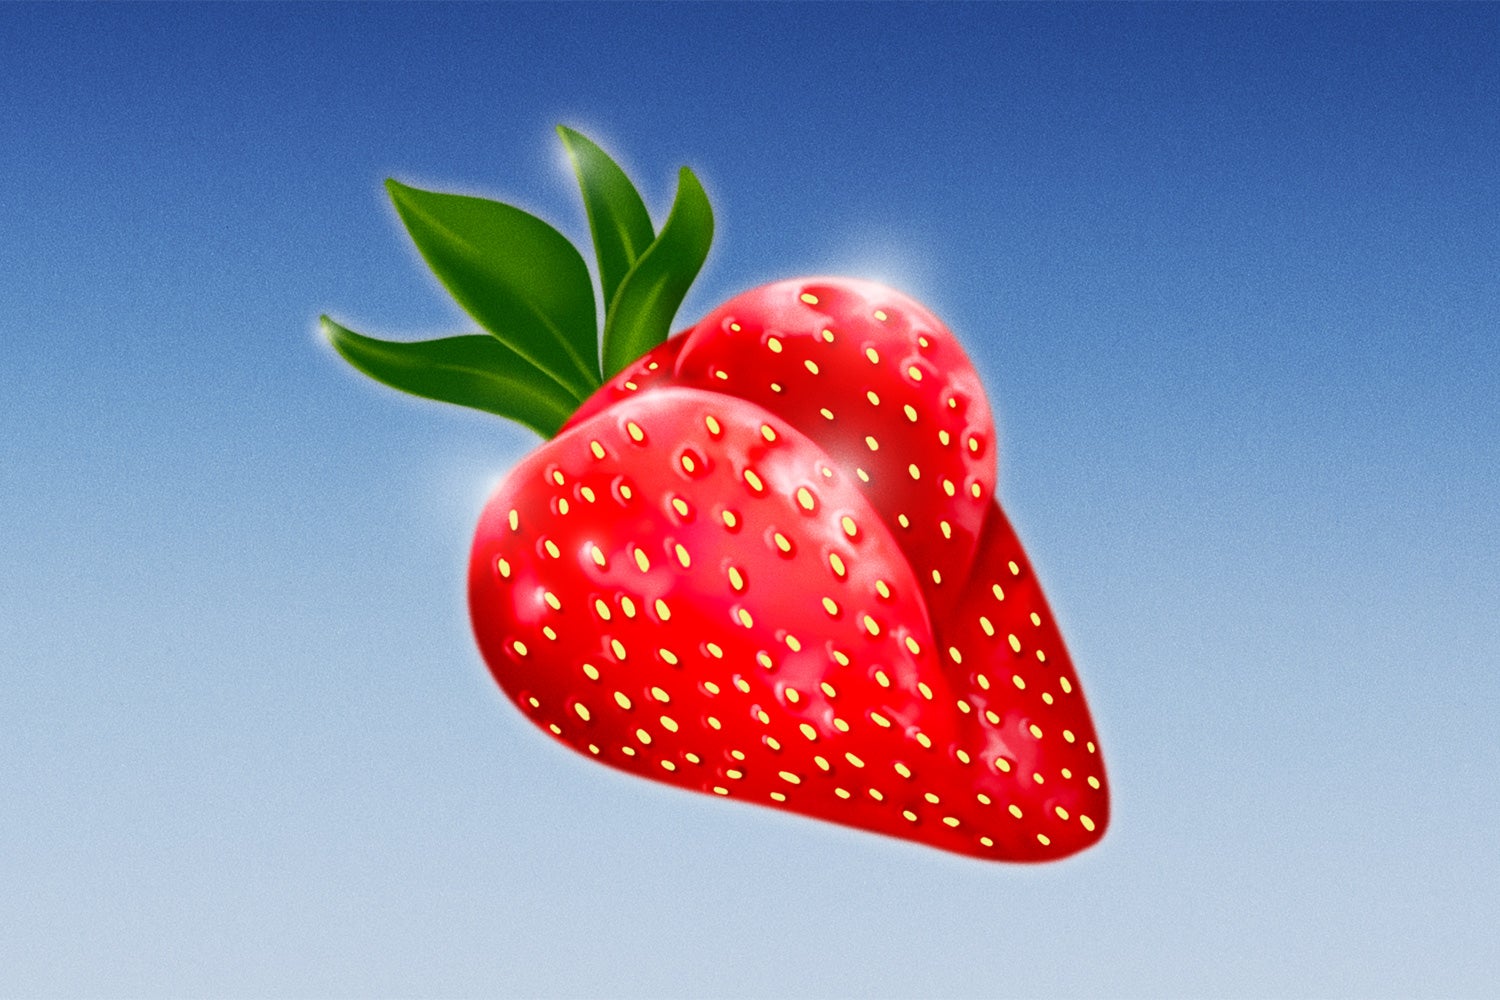 Red strawberry shaped like a butt on a blue and white ombre background